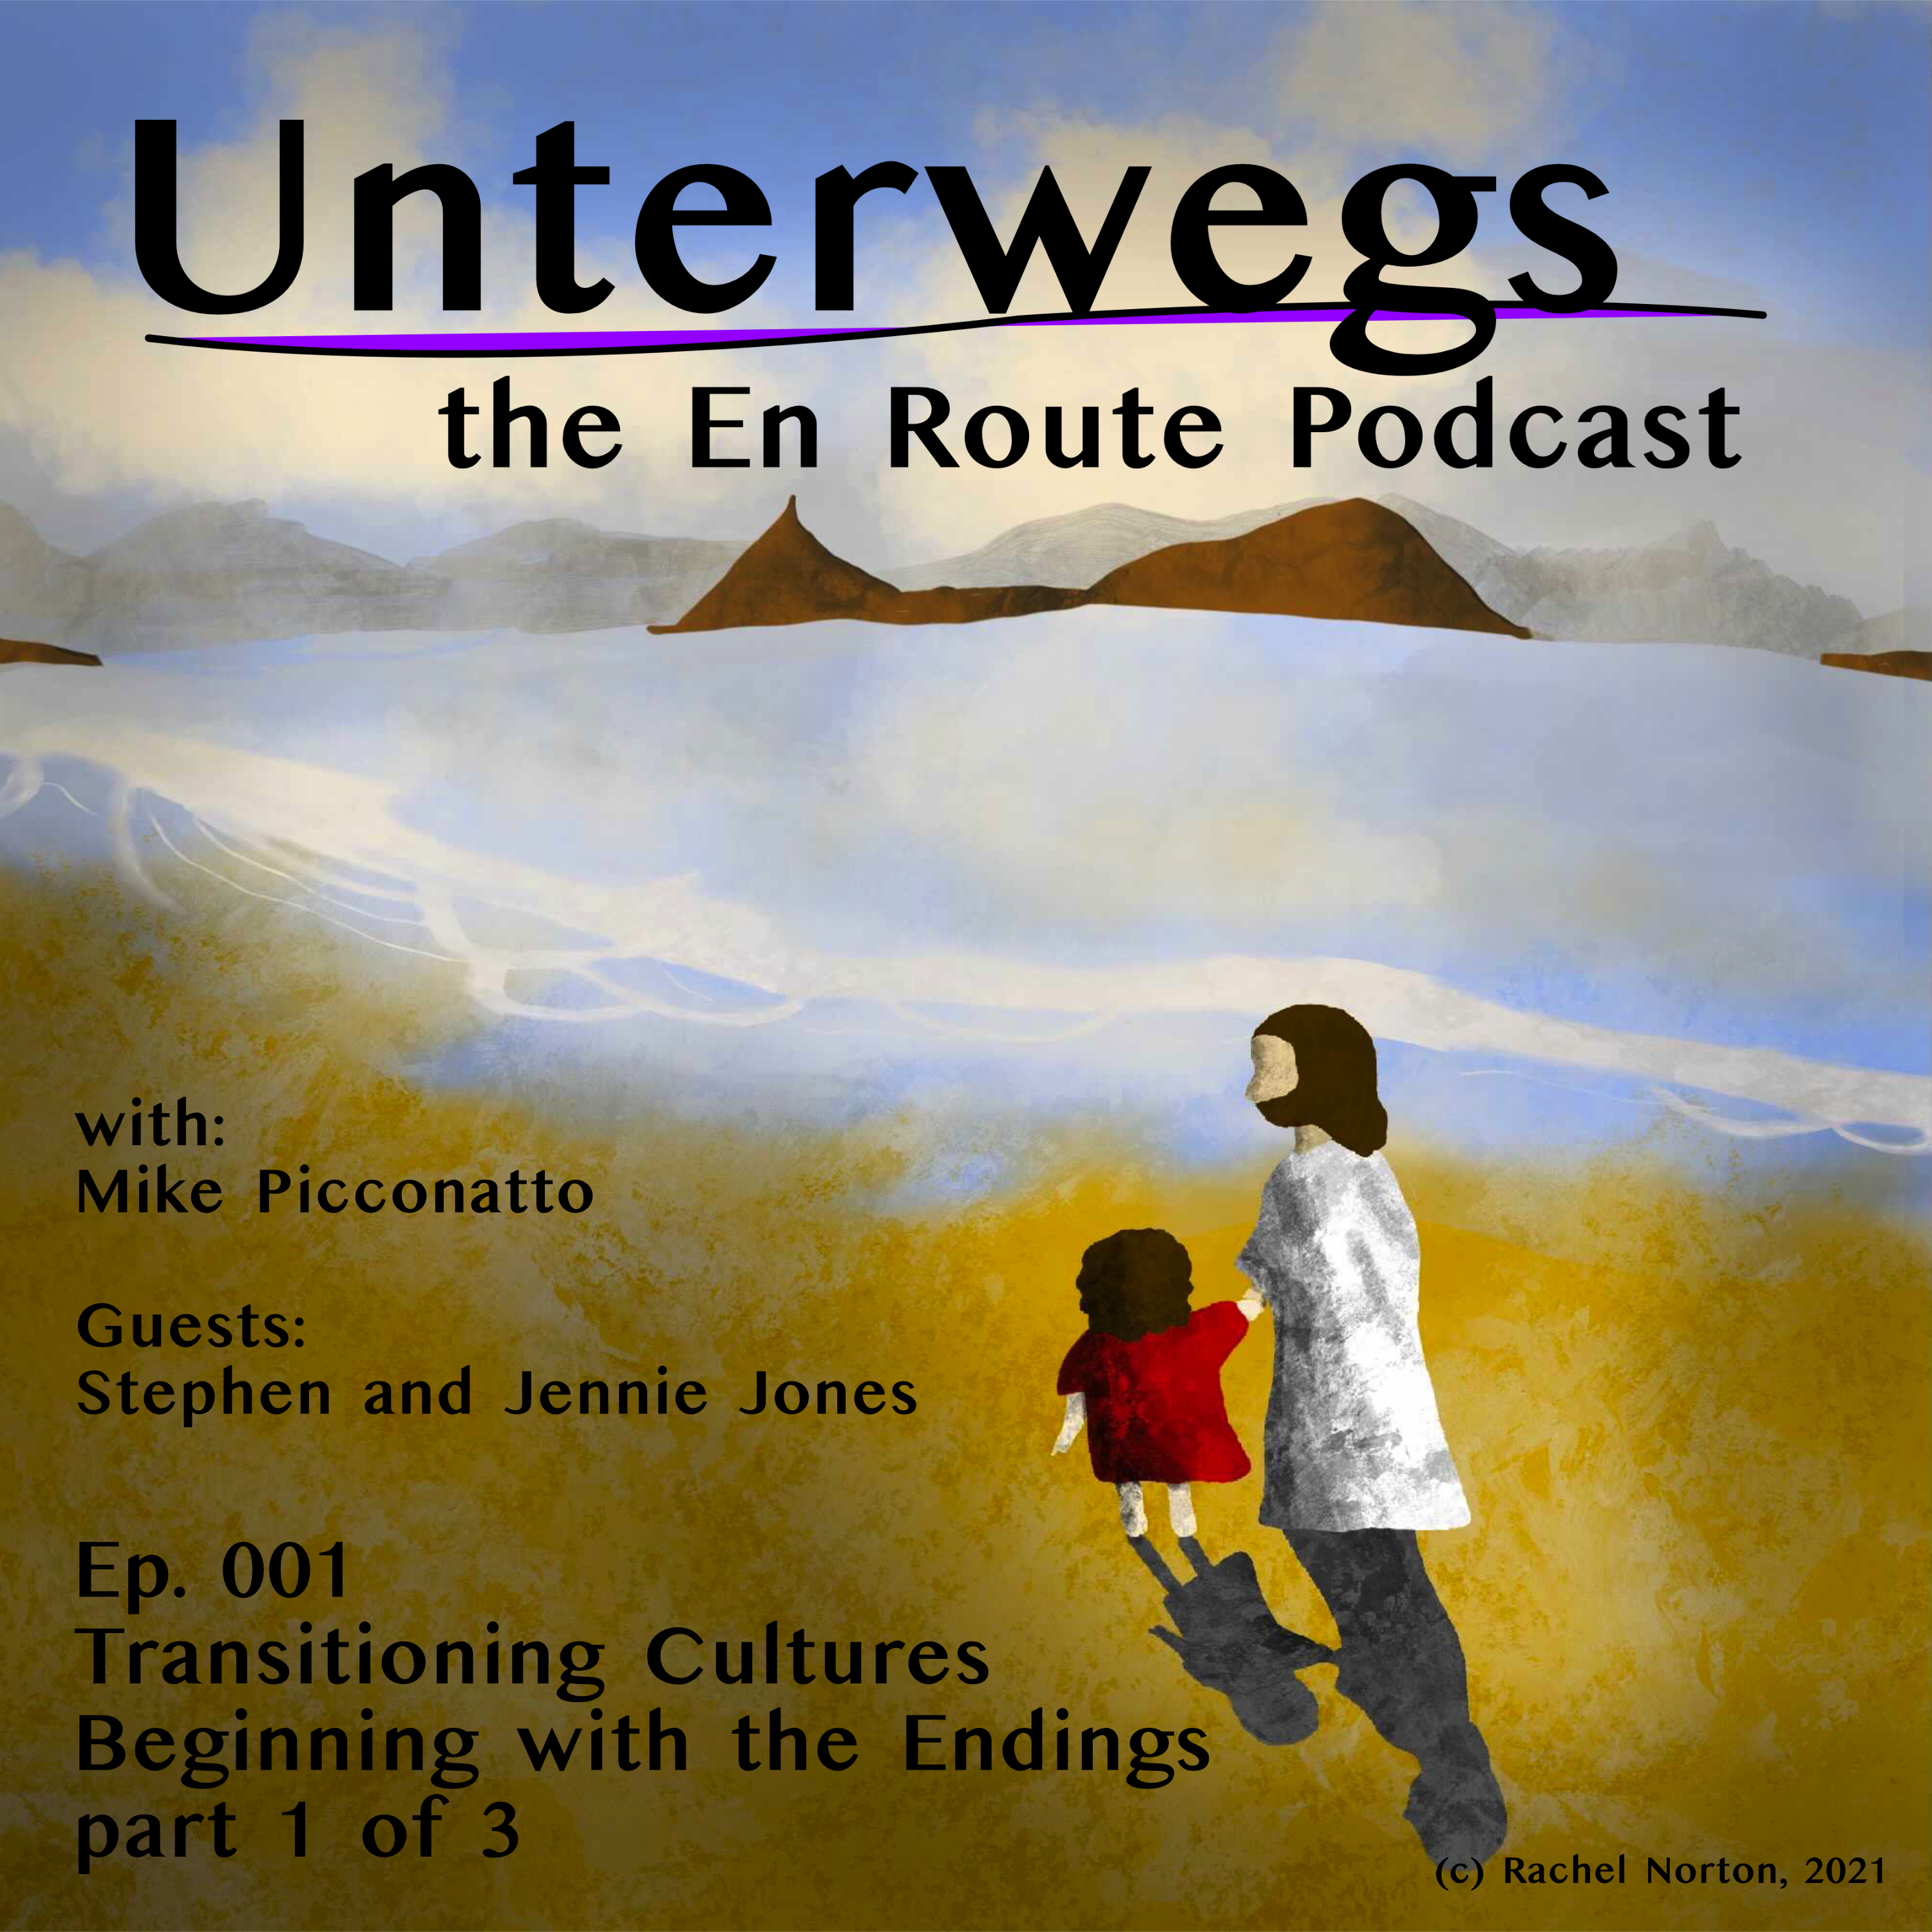 Episode 001 - Beginning with the Endings part 1 of 3